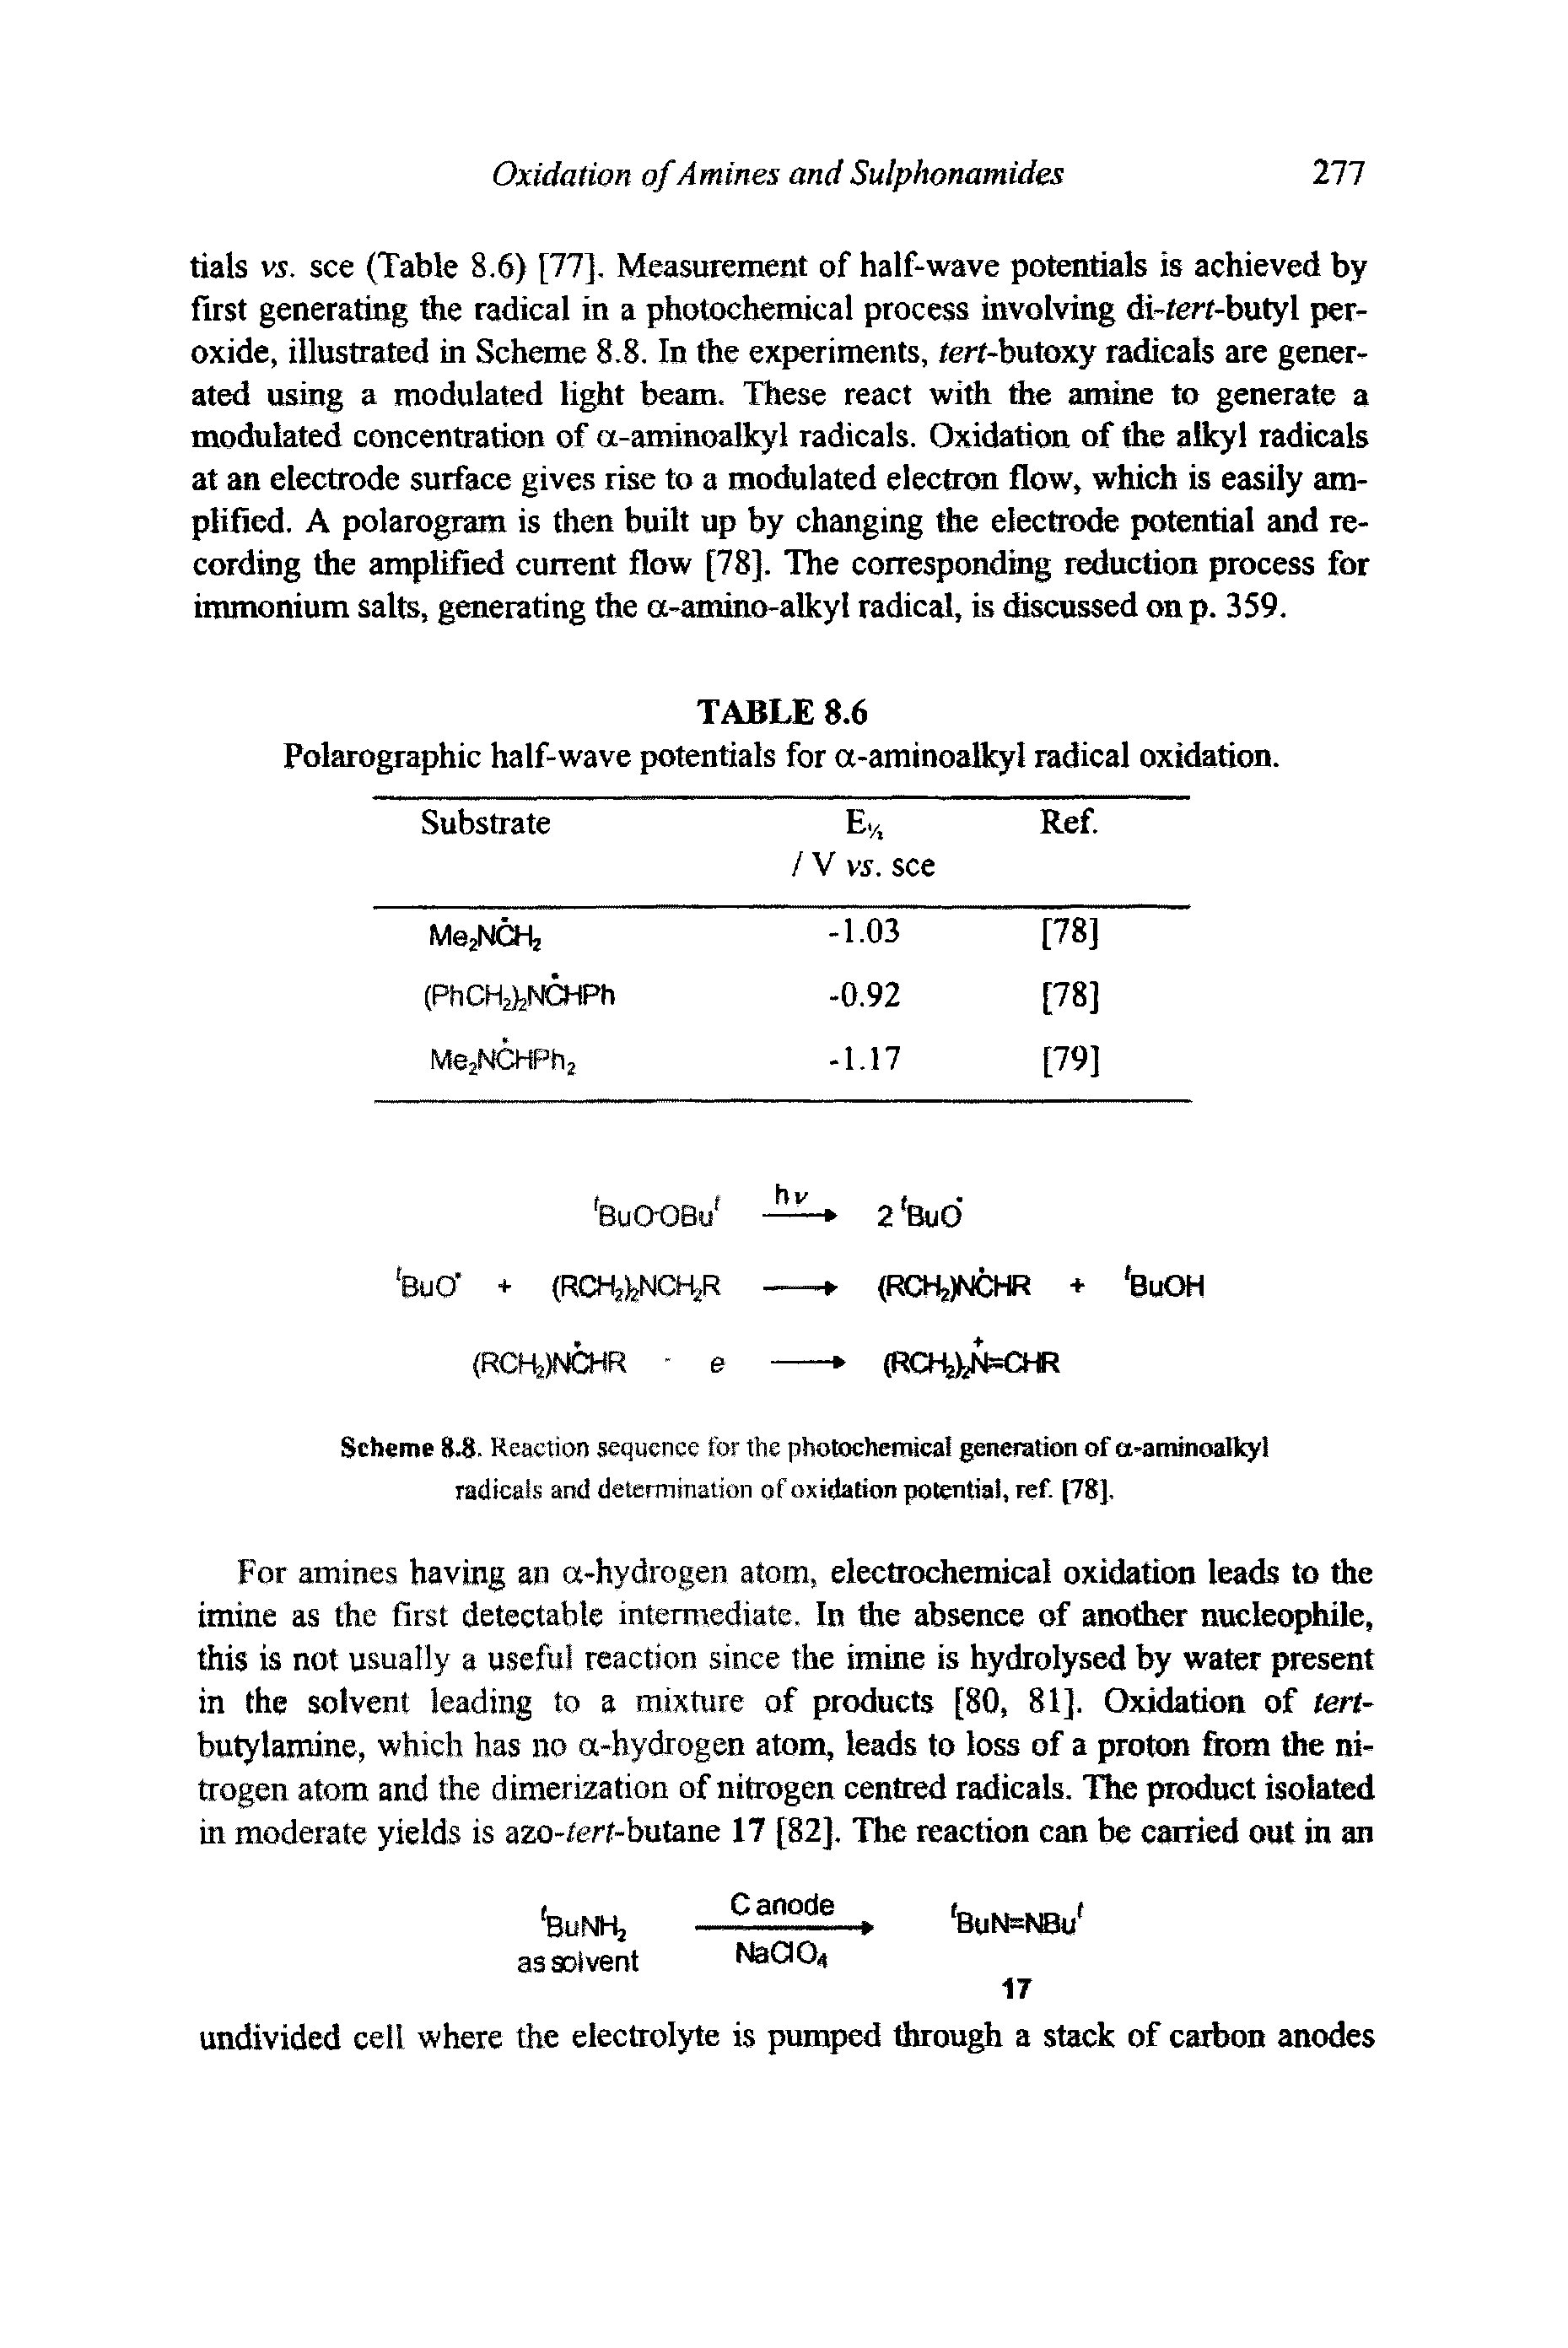 Scheme 8.8. Reaction sequence for the photochemical generation of a-atninoalltyl radicals and determination of oxidation potential, ref. [78J.